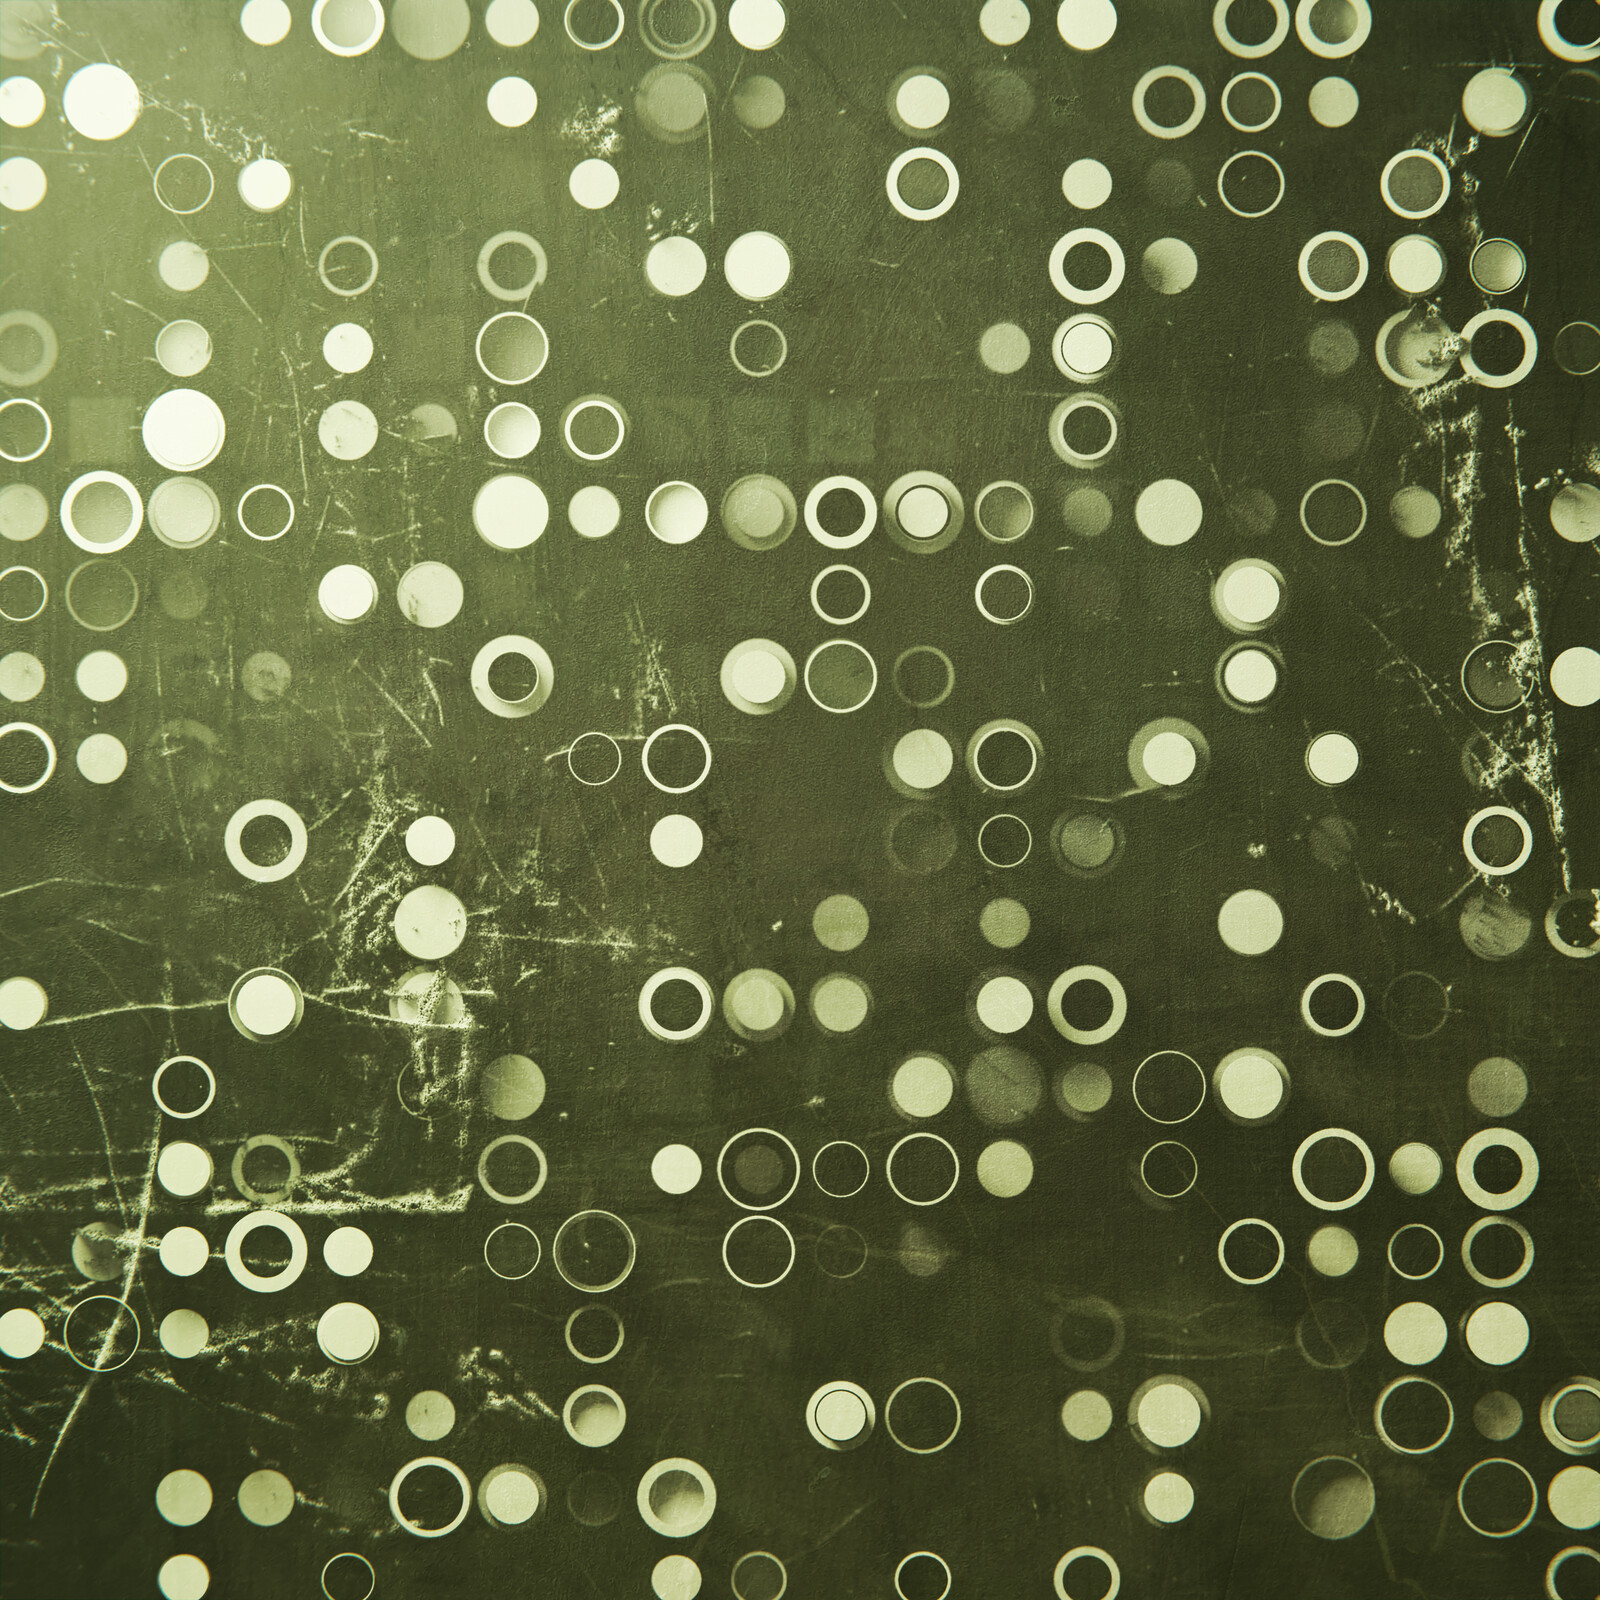 A grid of circles in a greenish light.